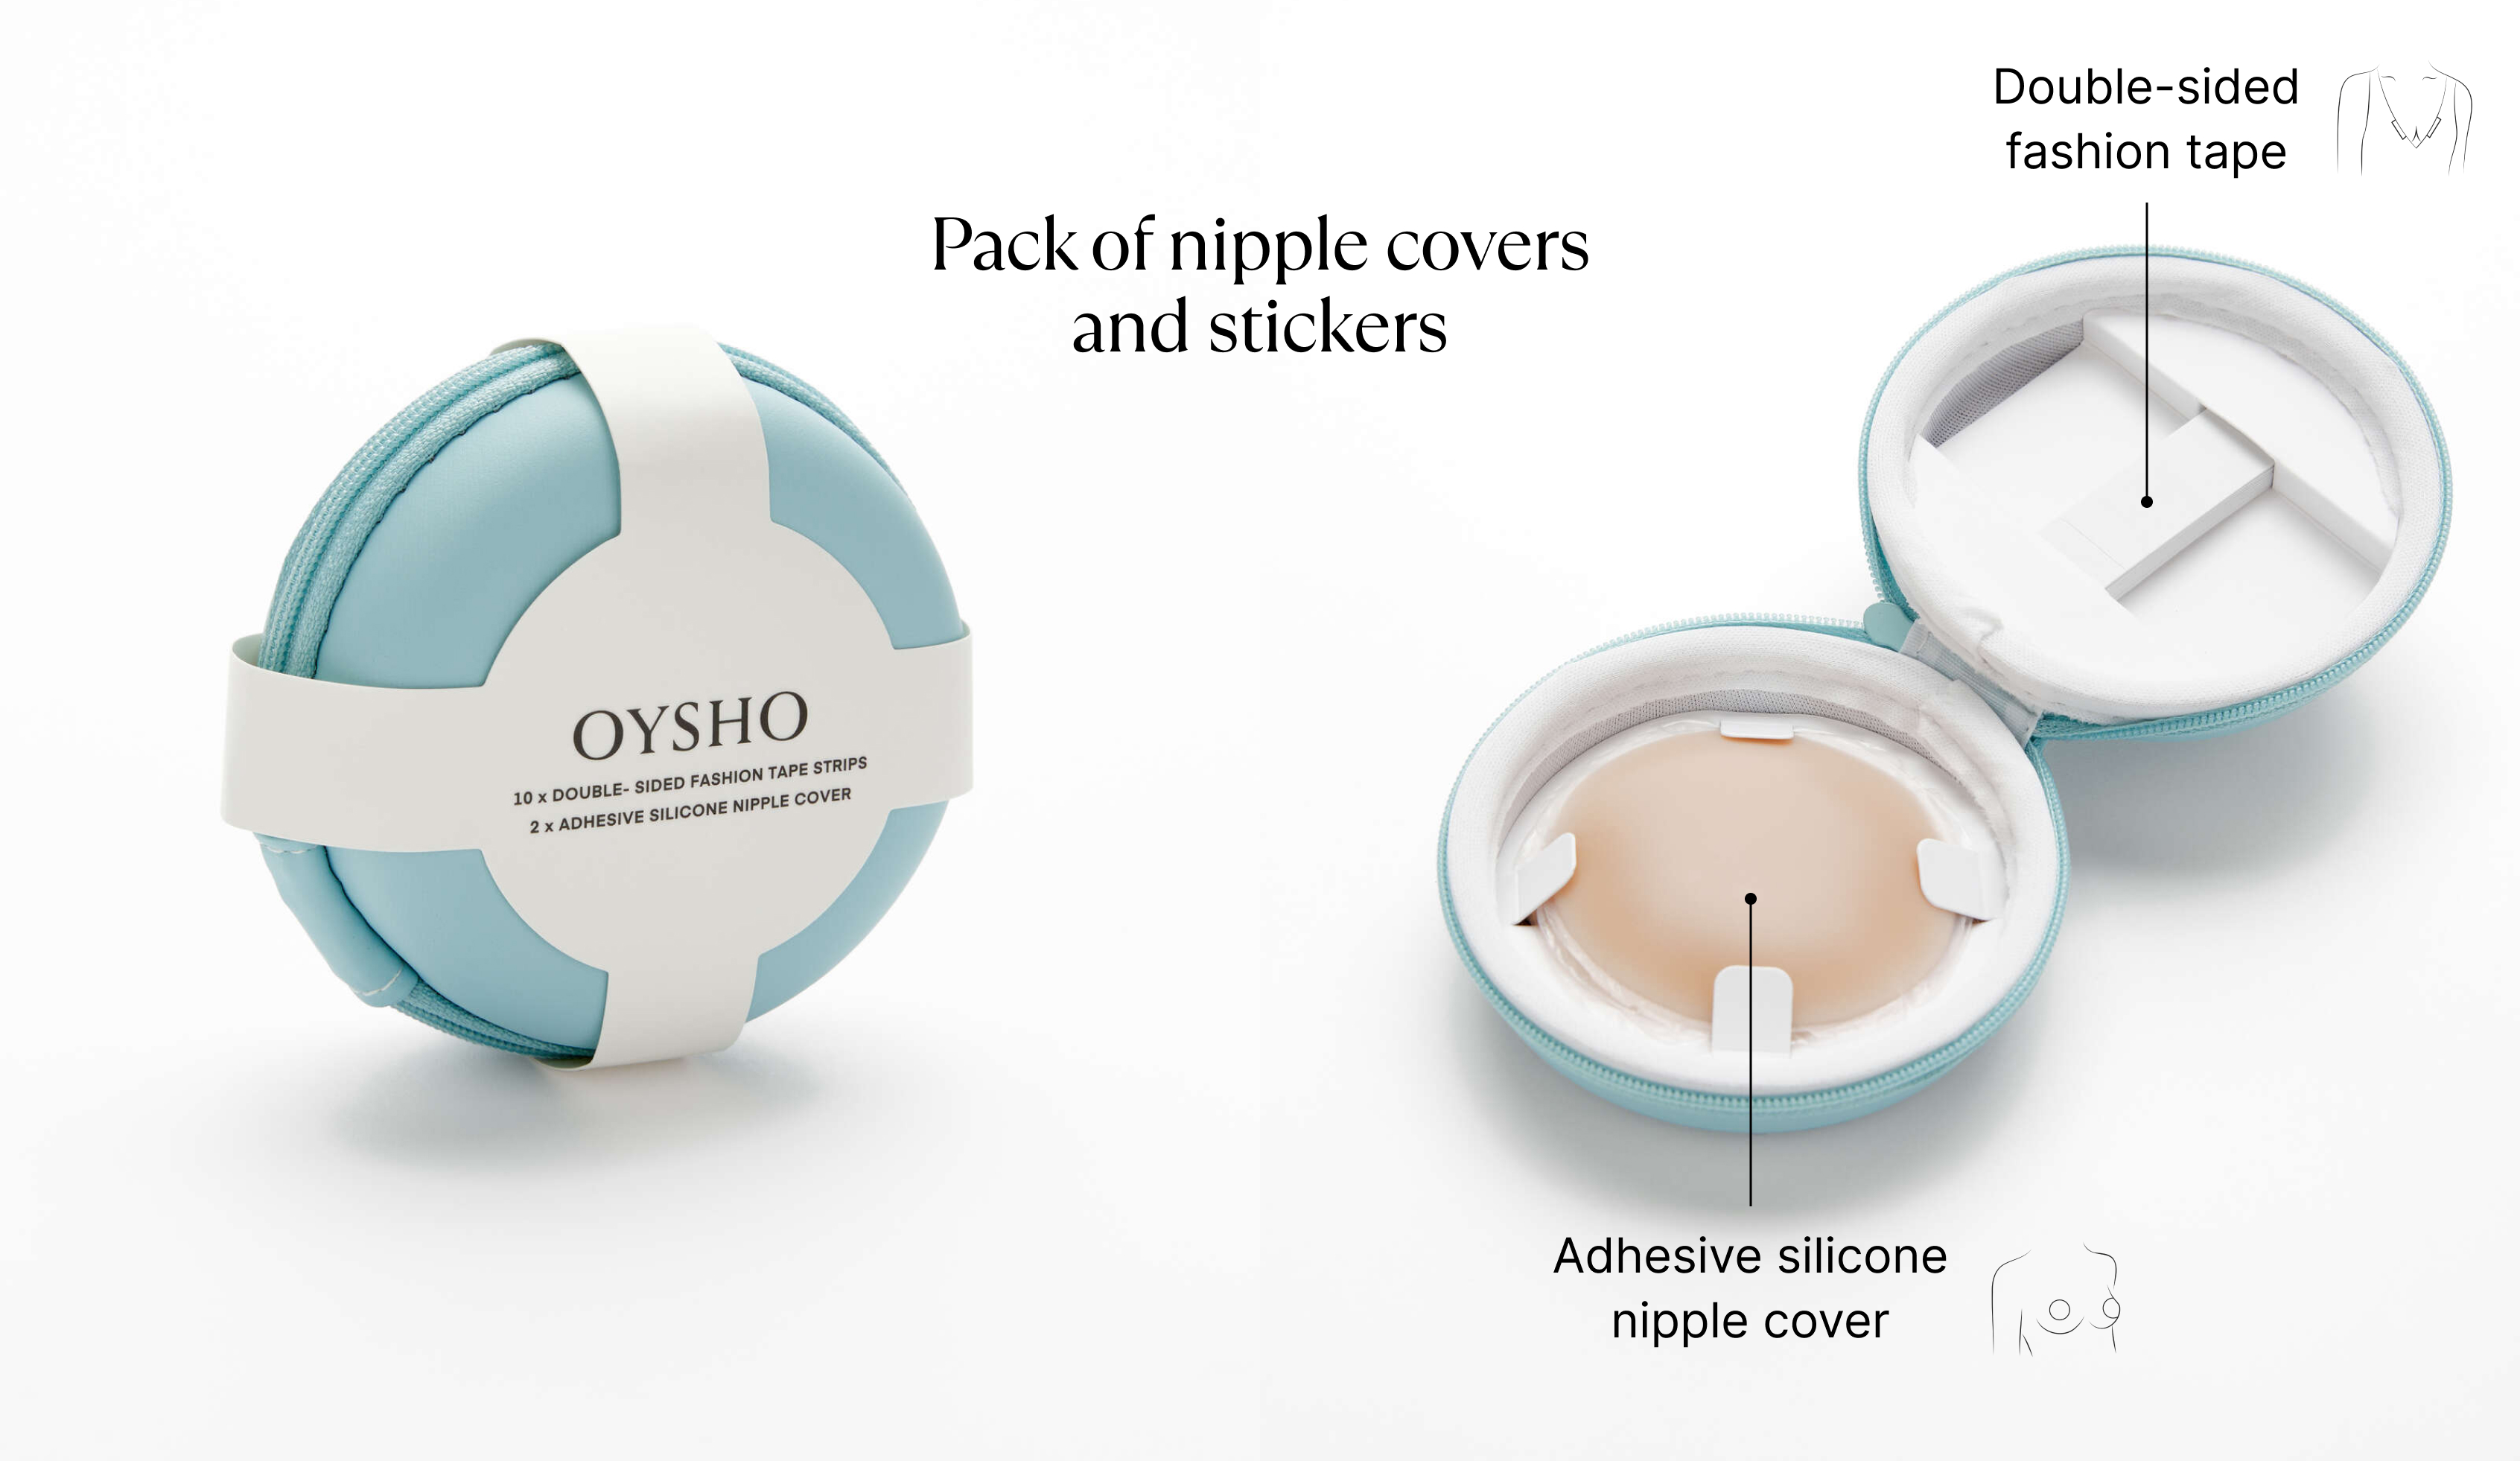 Pack of nipple covers and stickers